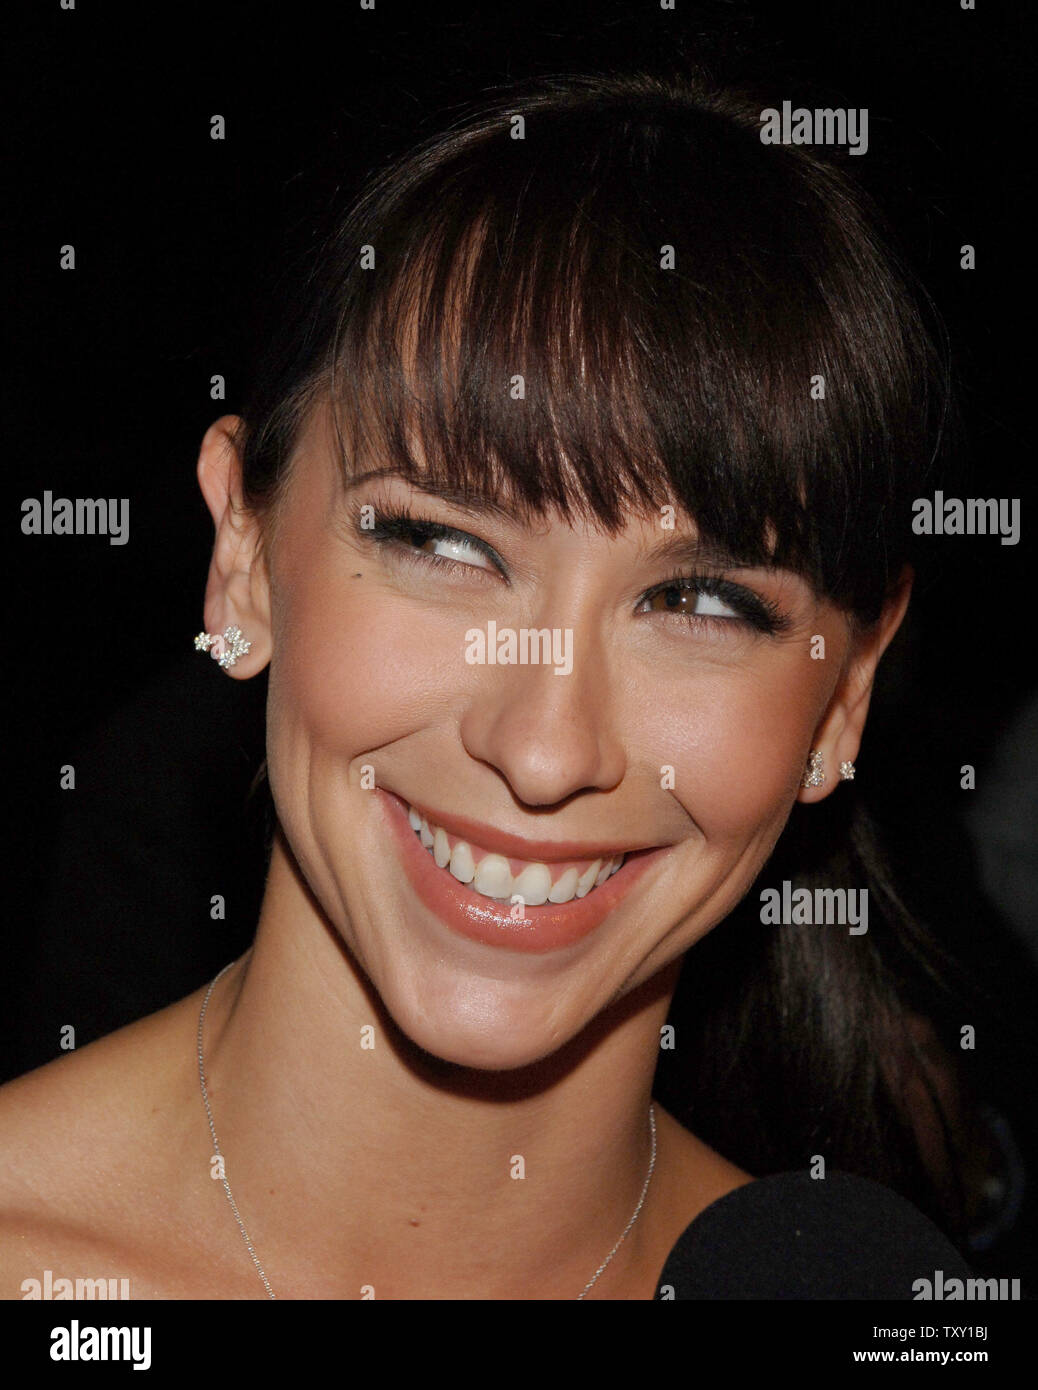 Actress Jennifer Love Hewitt, who stars in the new CBS thriller 'Ghost Whisperer' arrives for the premiere screening of the TV drama series for fans at Hollywood Forever Cemetery in Los Angeles September 9, 2005. (UPI Photo/Jim Ruymen) Stock Photo